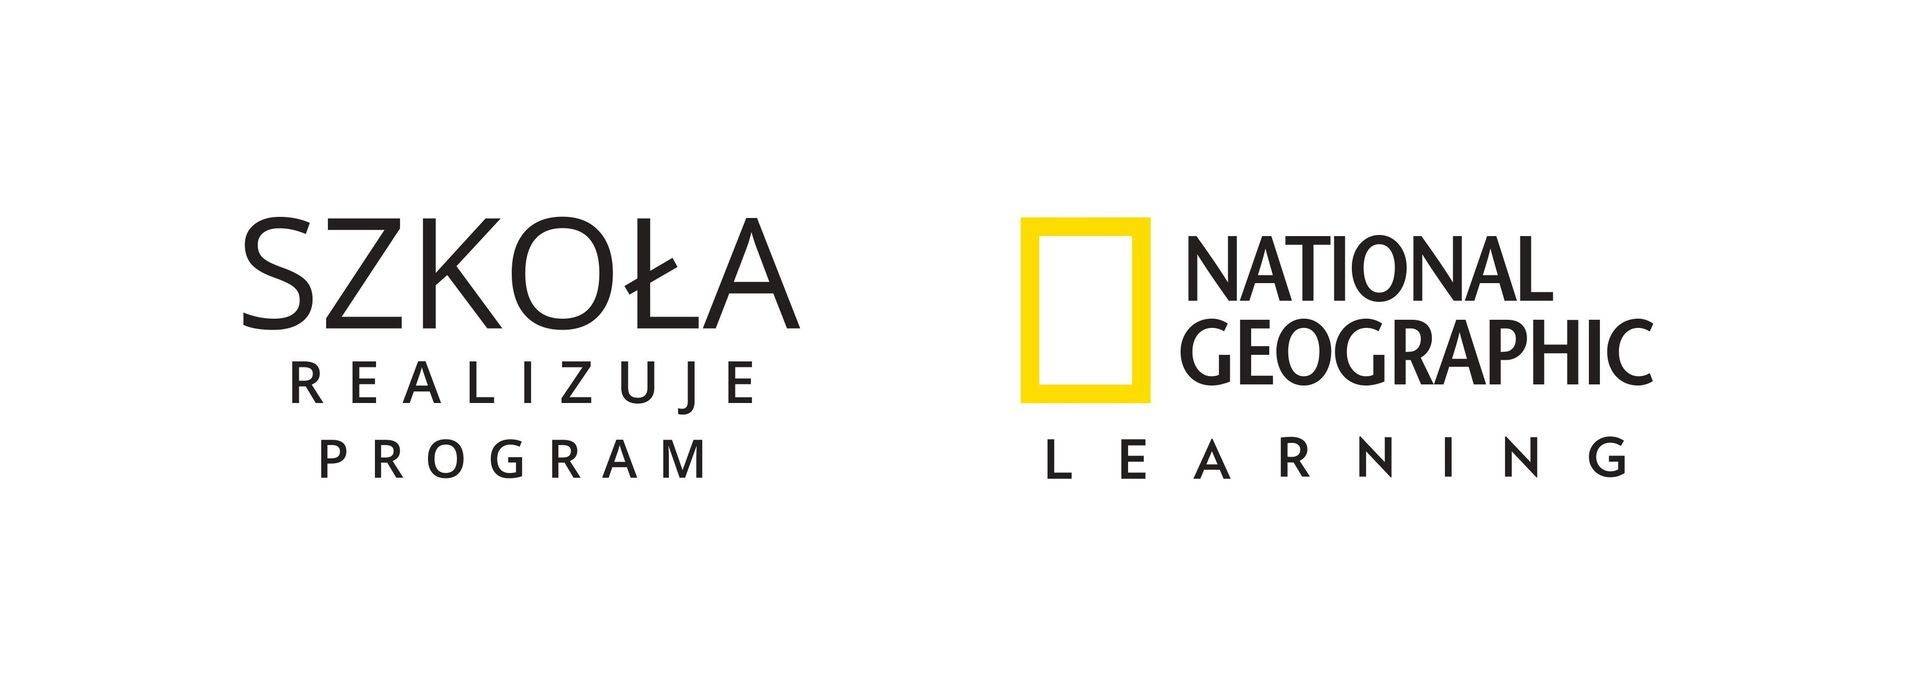 Program National Geographic Learning